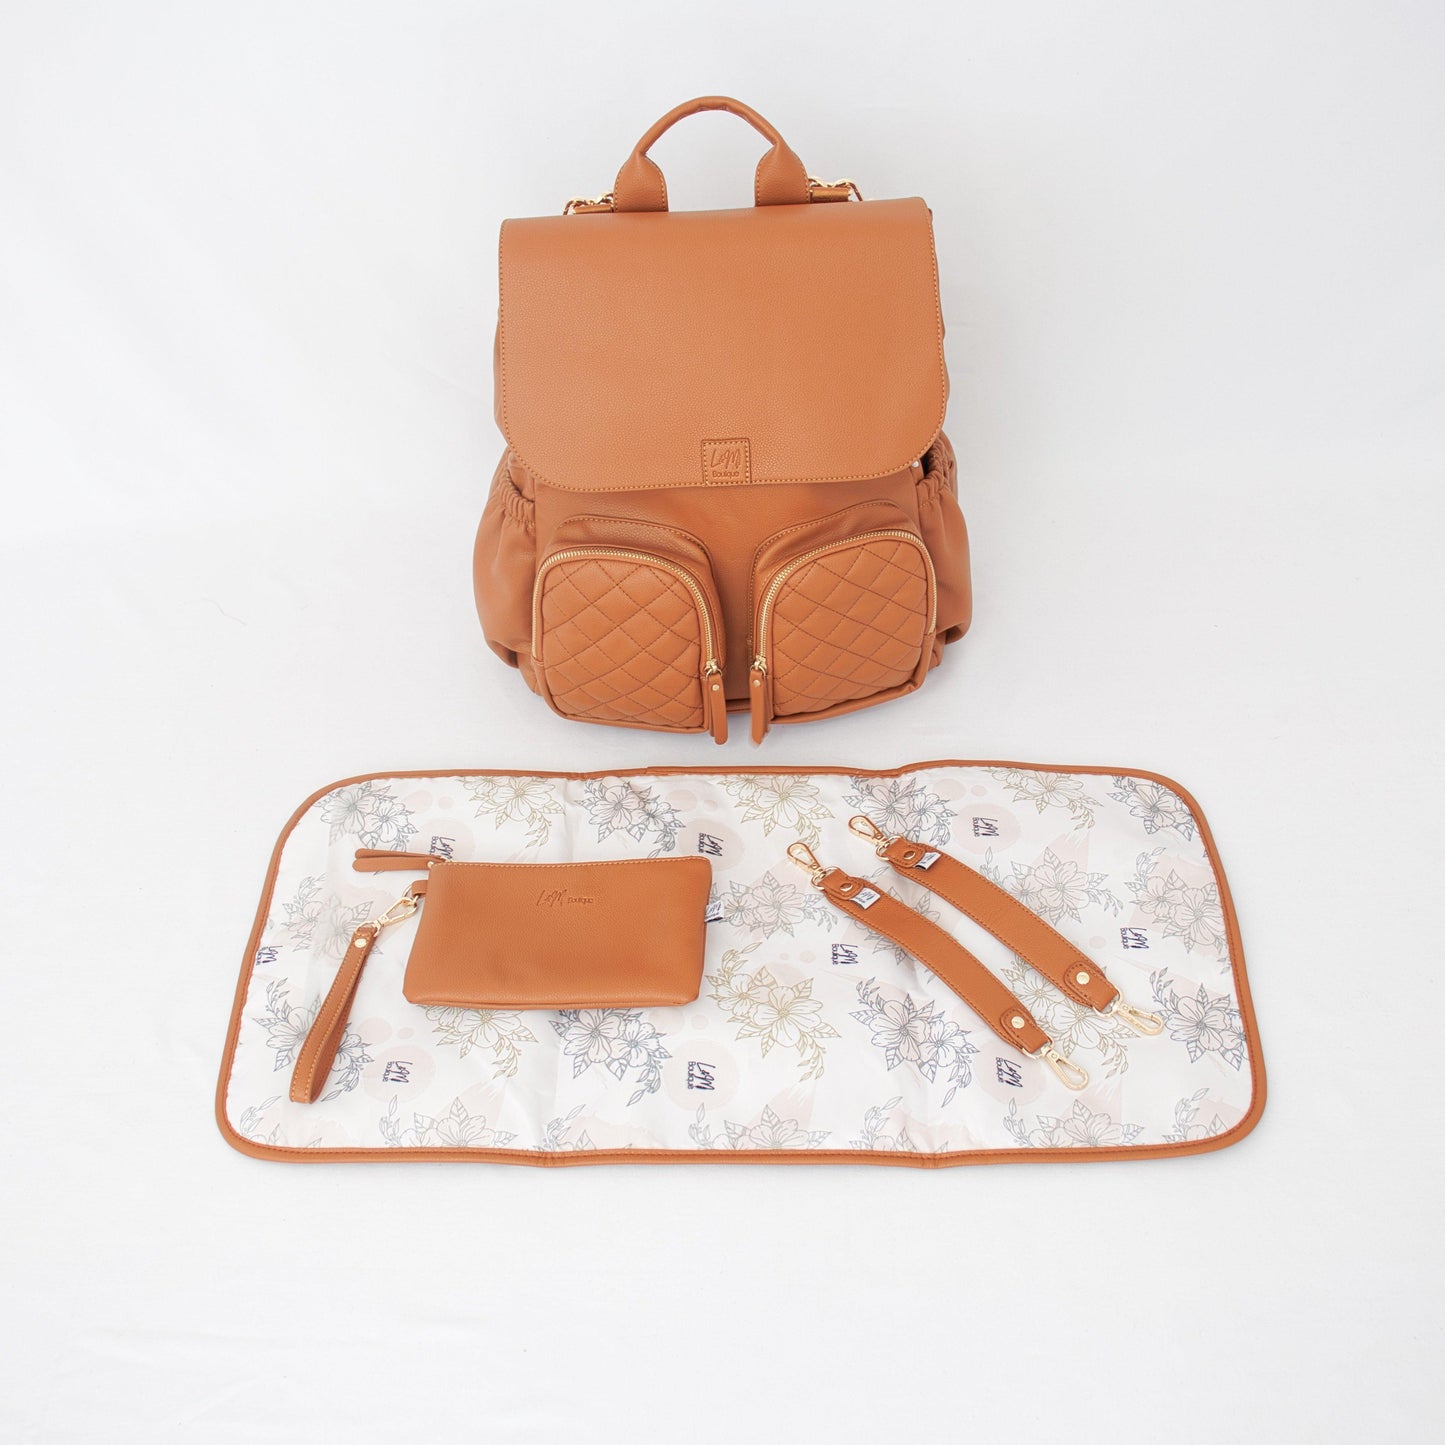 Milana Nappy Bag in Tan by L&M Boutique Australia with insulated pockets for baby bottles| Tan Baby Bag | Nappy Backpack | Diaper Bag | Changing Bag